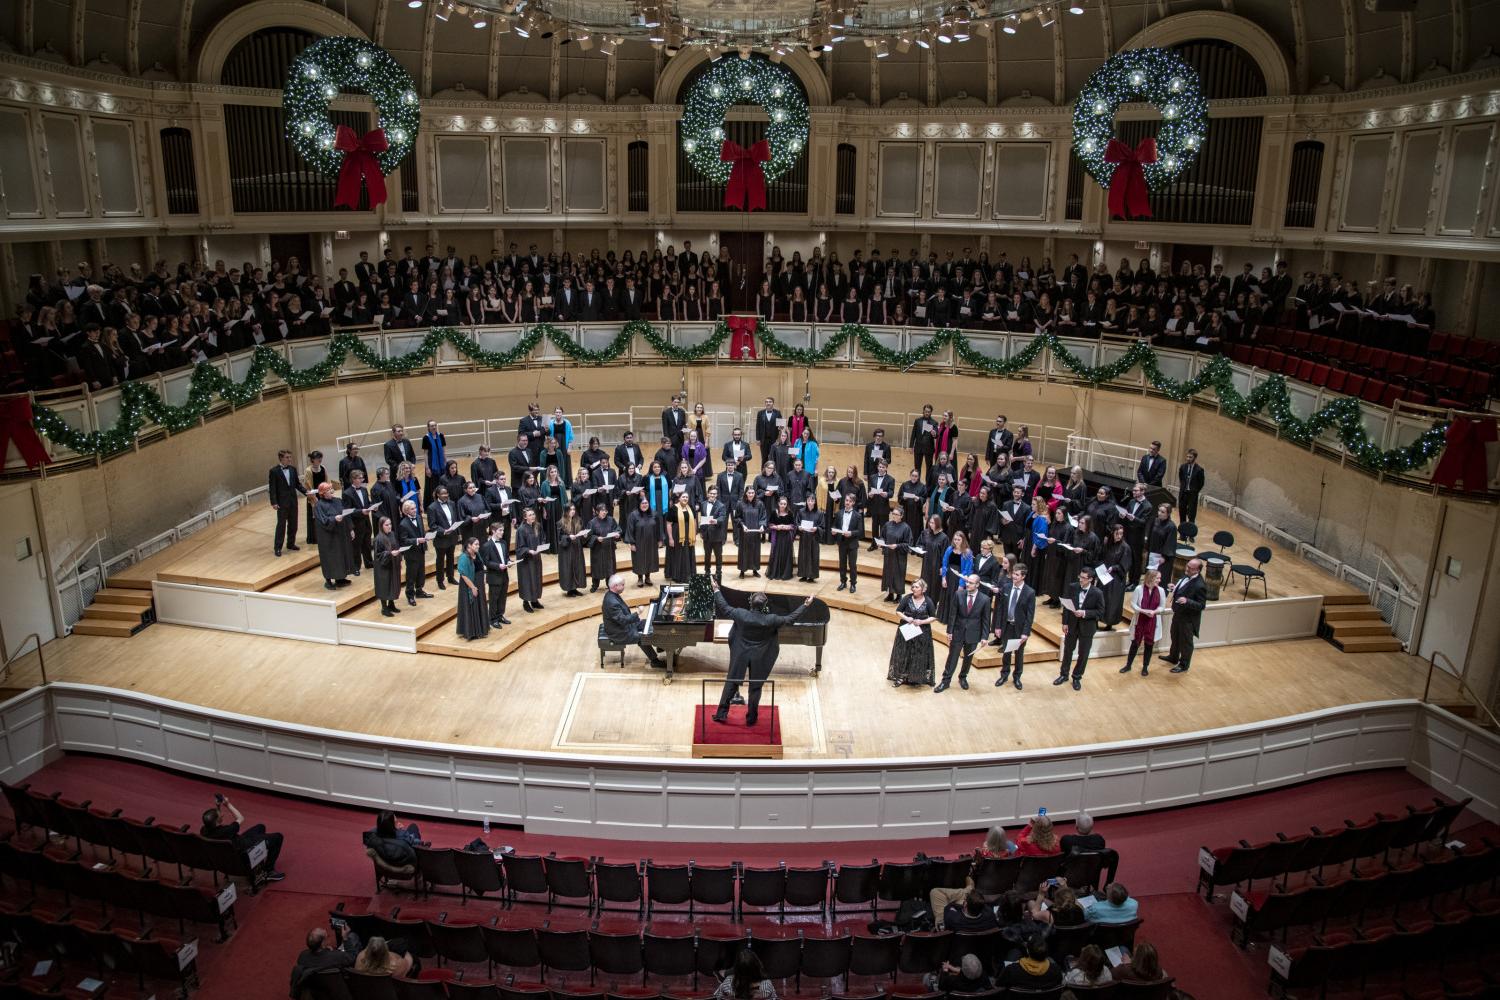 The <a href='http://hav.free-9.com'>bv伟德ios下载</a> Choir performs in the Chicago Symphony Hall.